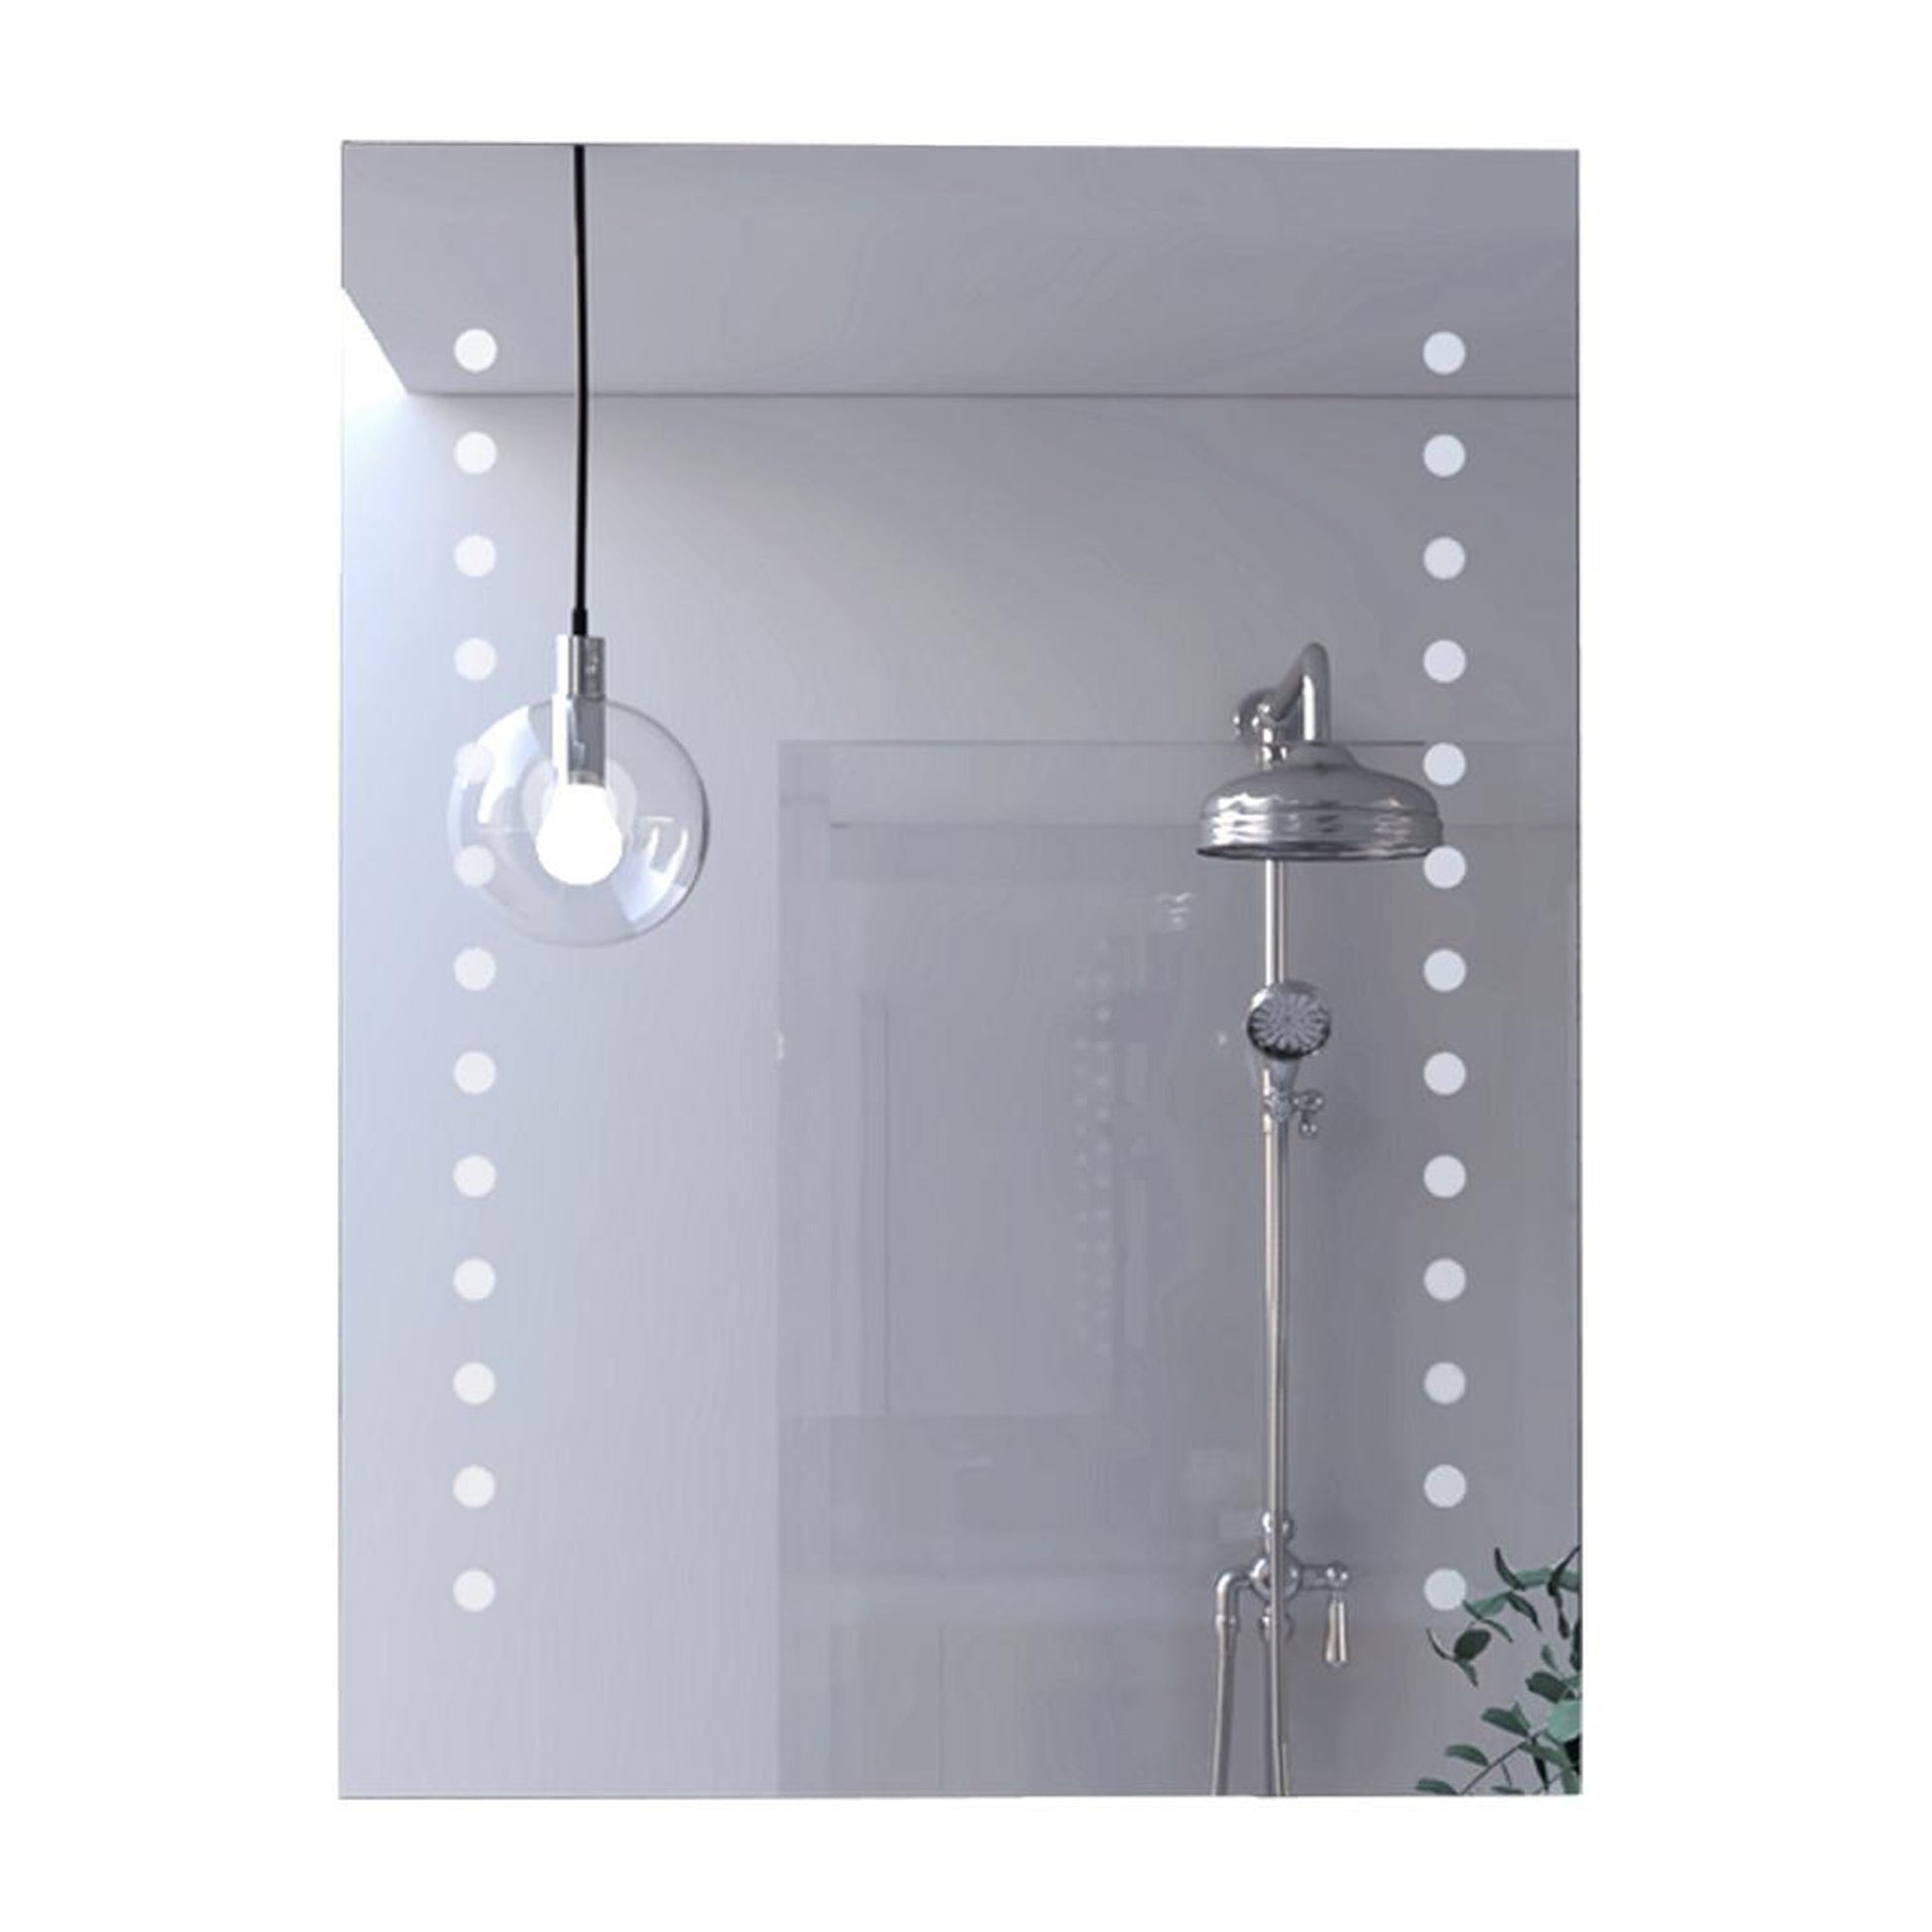 TUHOME Flektar Bras 24" x 32" Rectangular Frameless Wall-Mounted Mirror With Sandblasted Frosted Circles